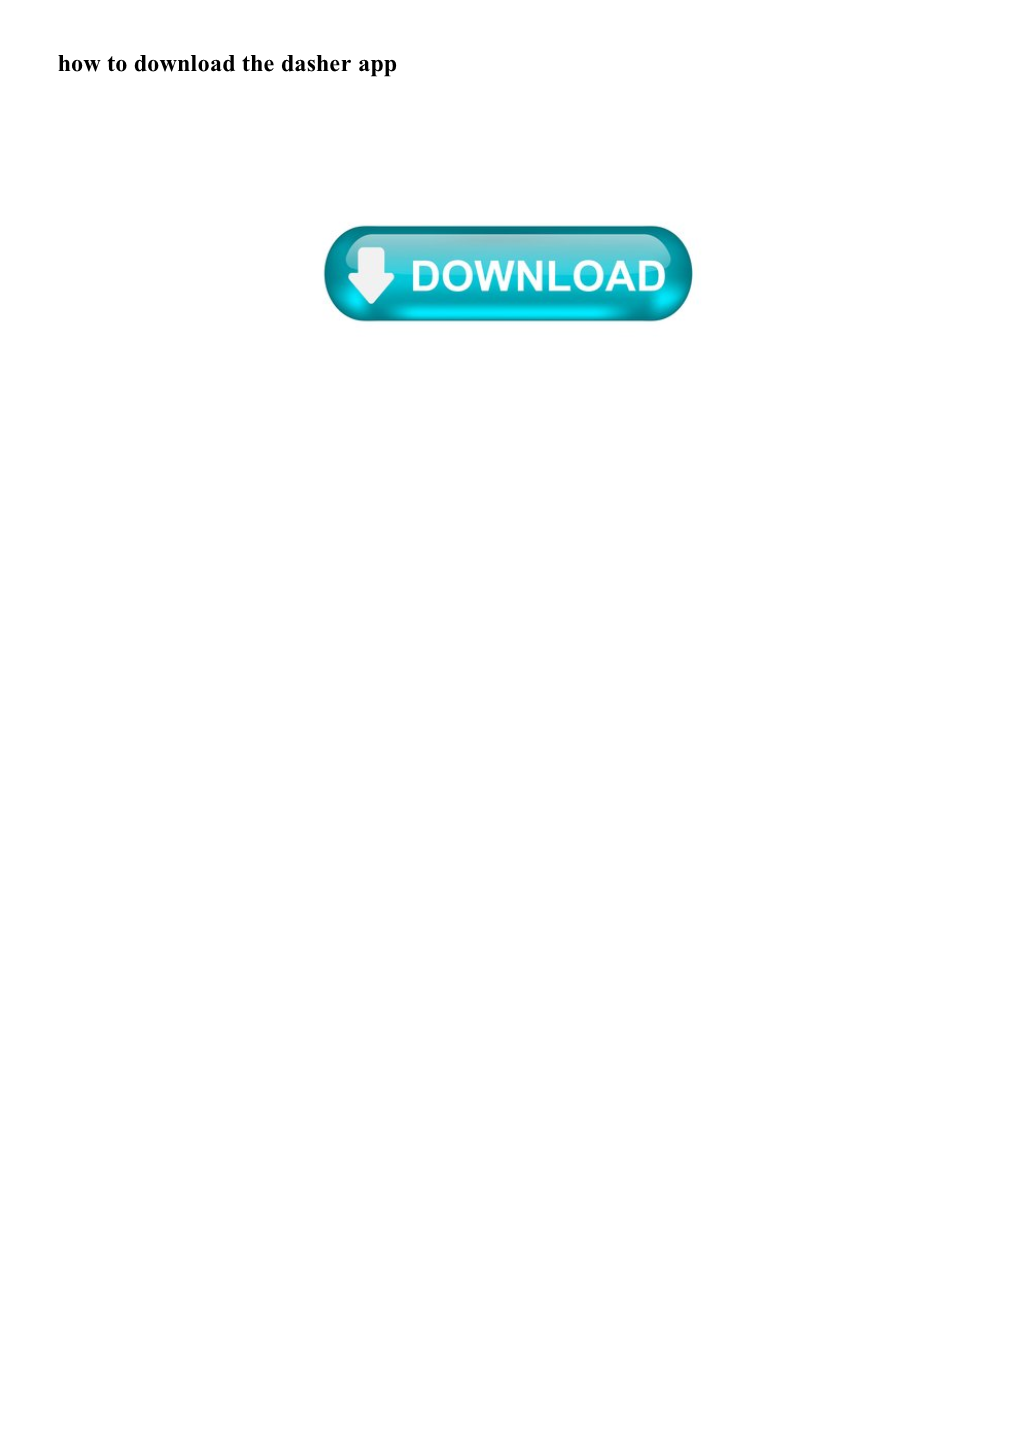 How to Download the Dasher App How to Download the Dasher App